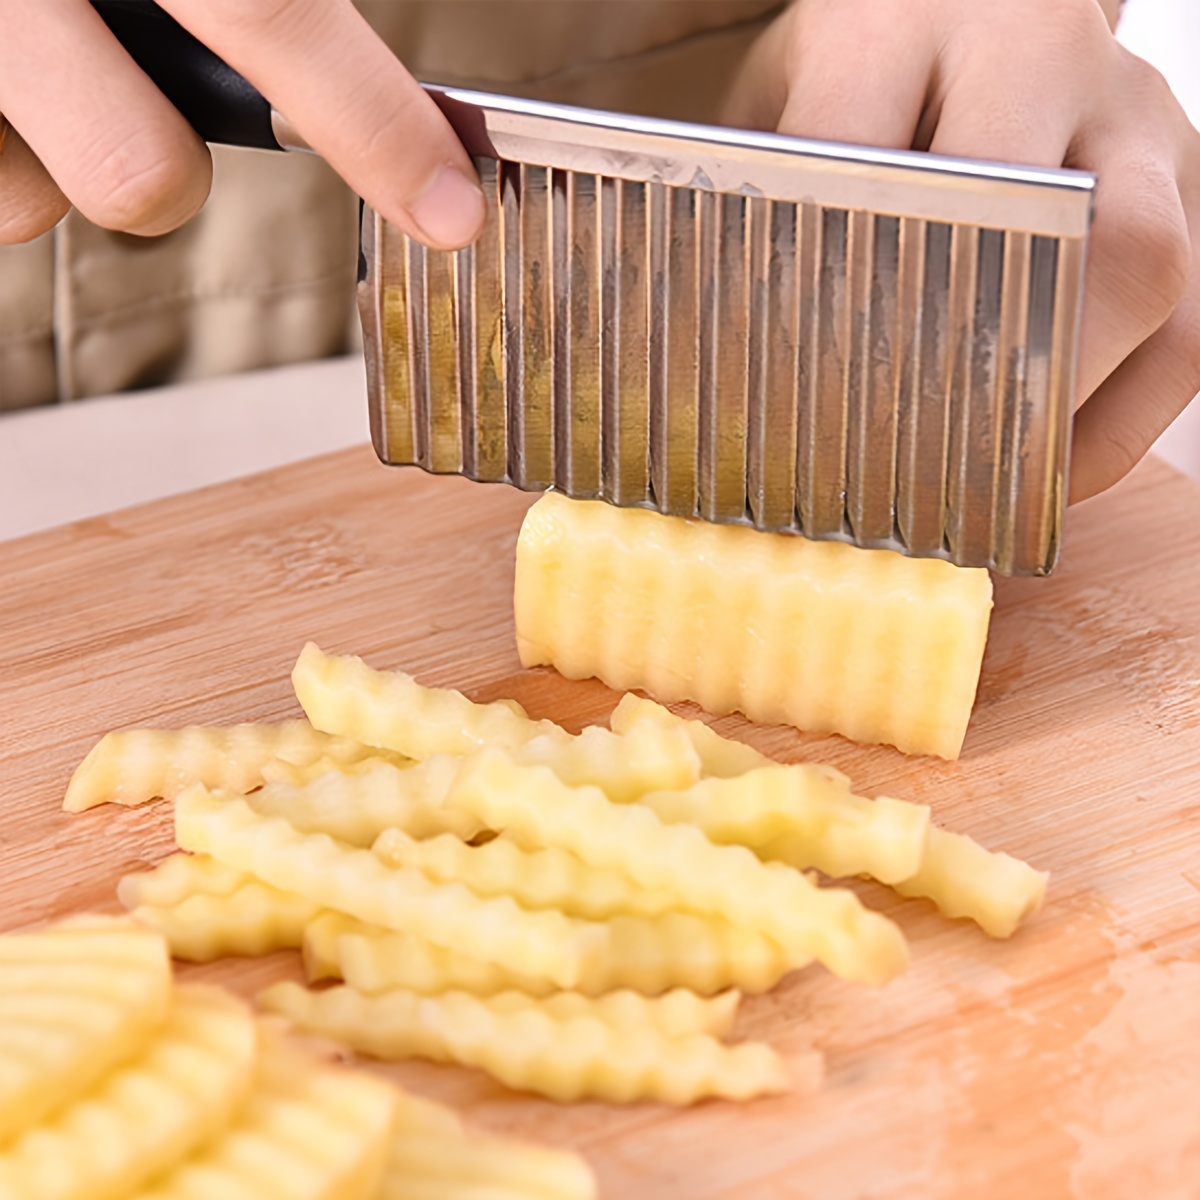 Potato Slice Knife, Corrugated French Fries Cutter with Stainless Steel Blade for Vegetable, Fruit and Waffle, Vegetable Cutter - Corrugated Slicer 